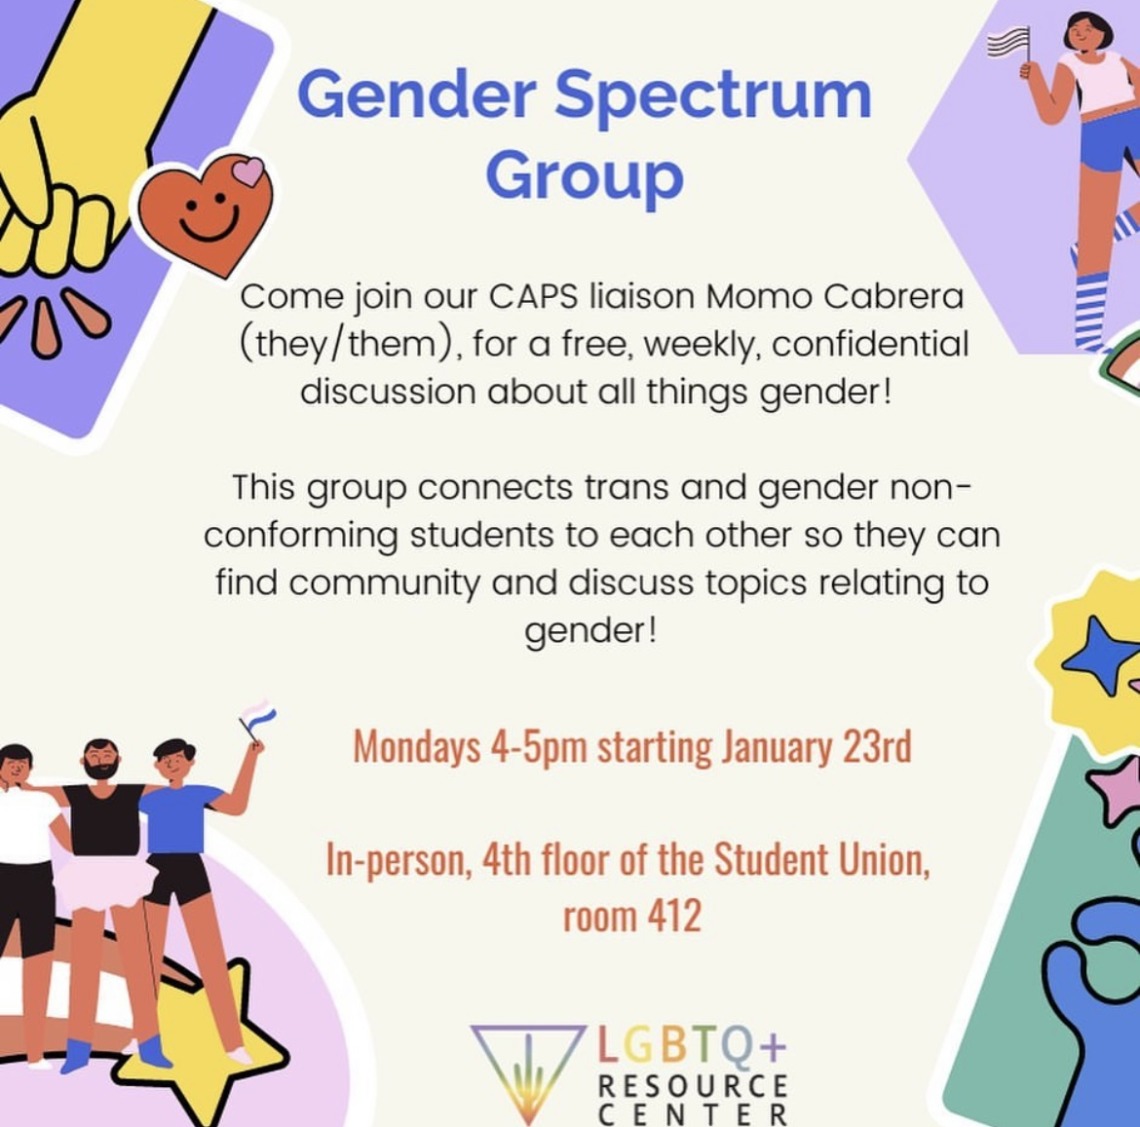 Gender Spectrum Group. Mondays 4-5pm, in-person, 4th floor of student union room 412